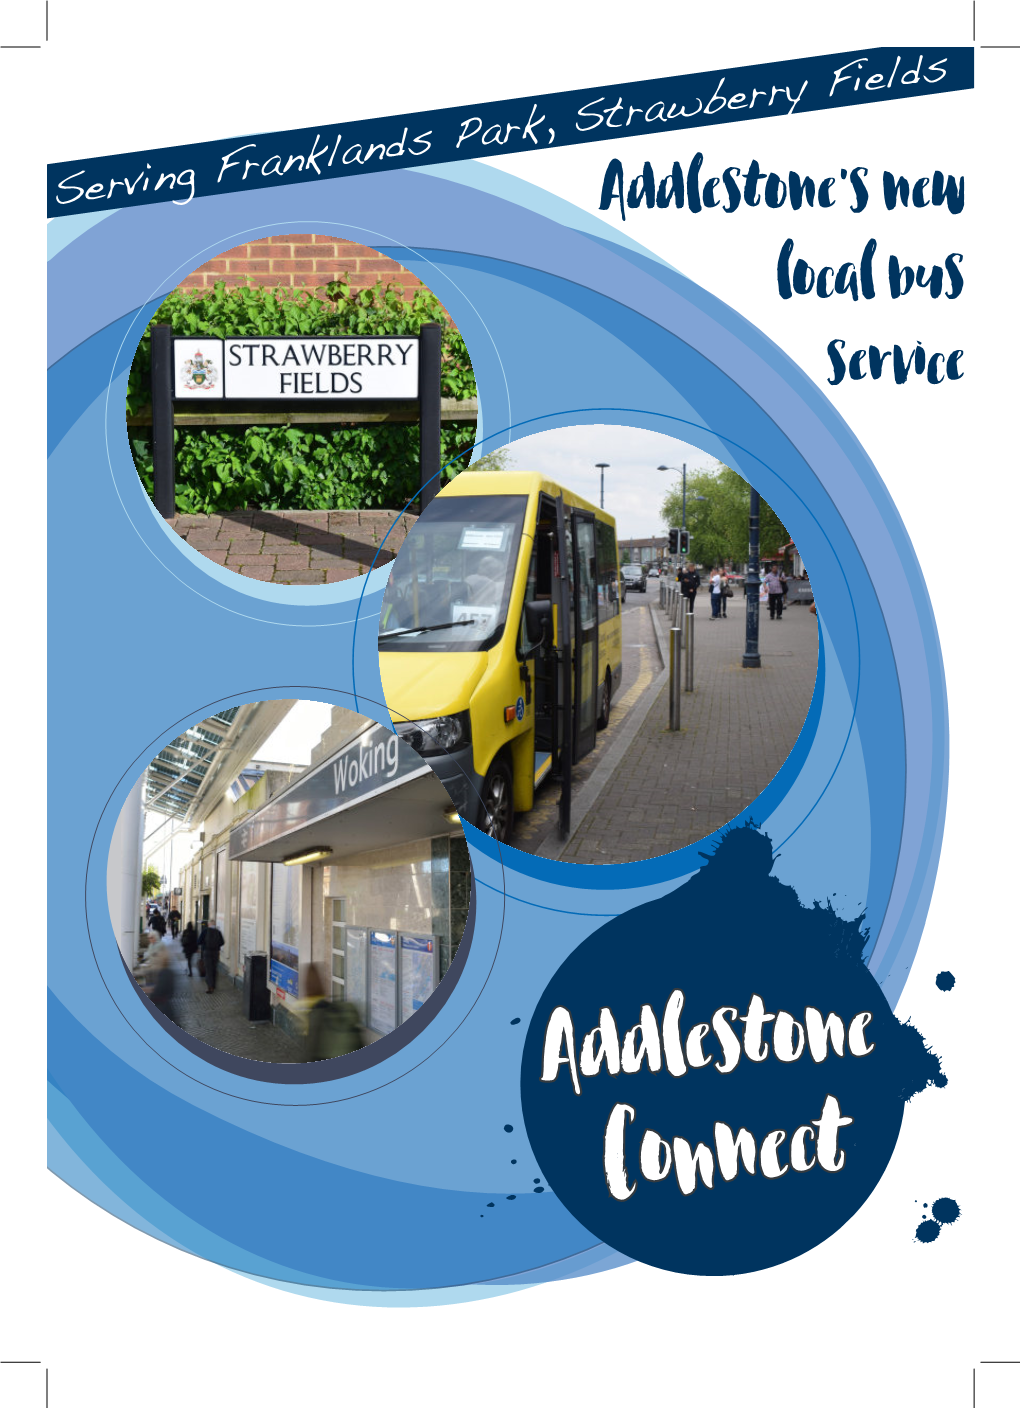 Addlestone Connect Booklet